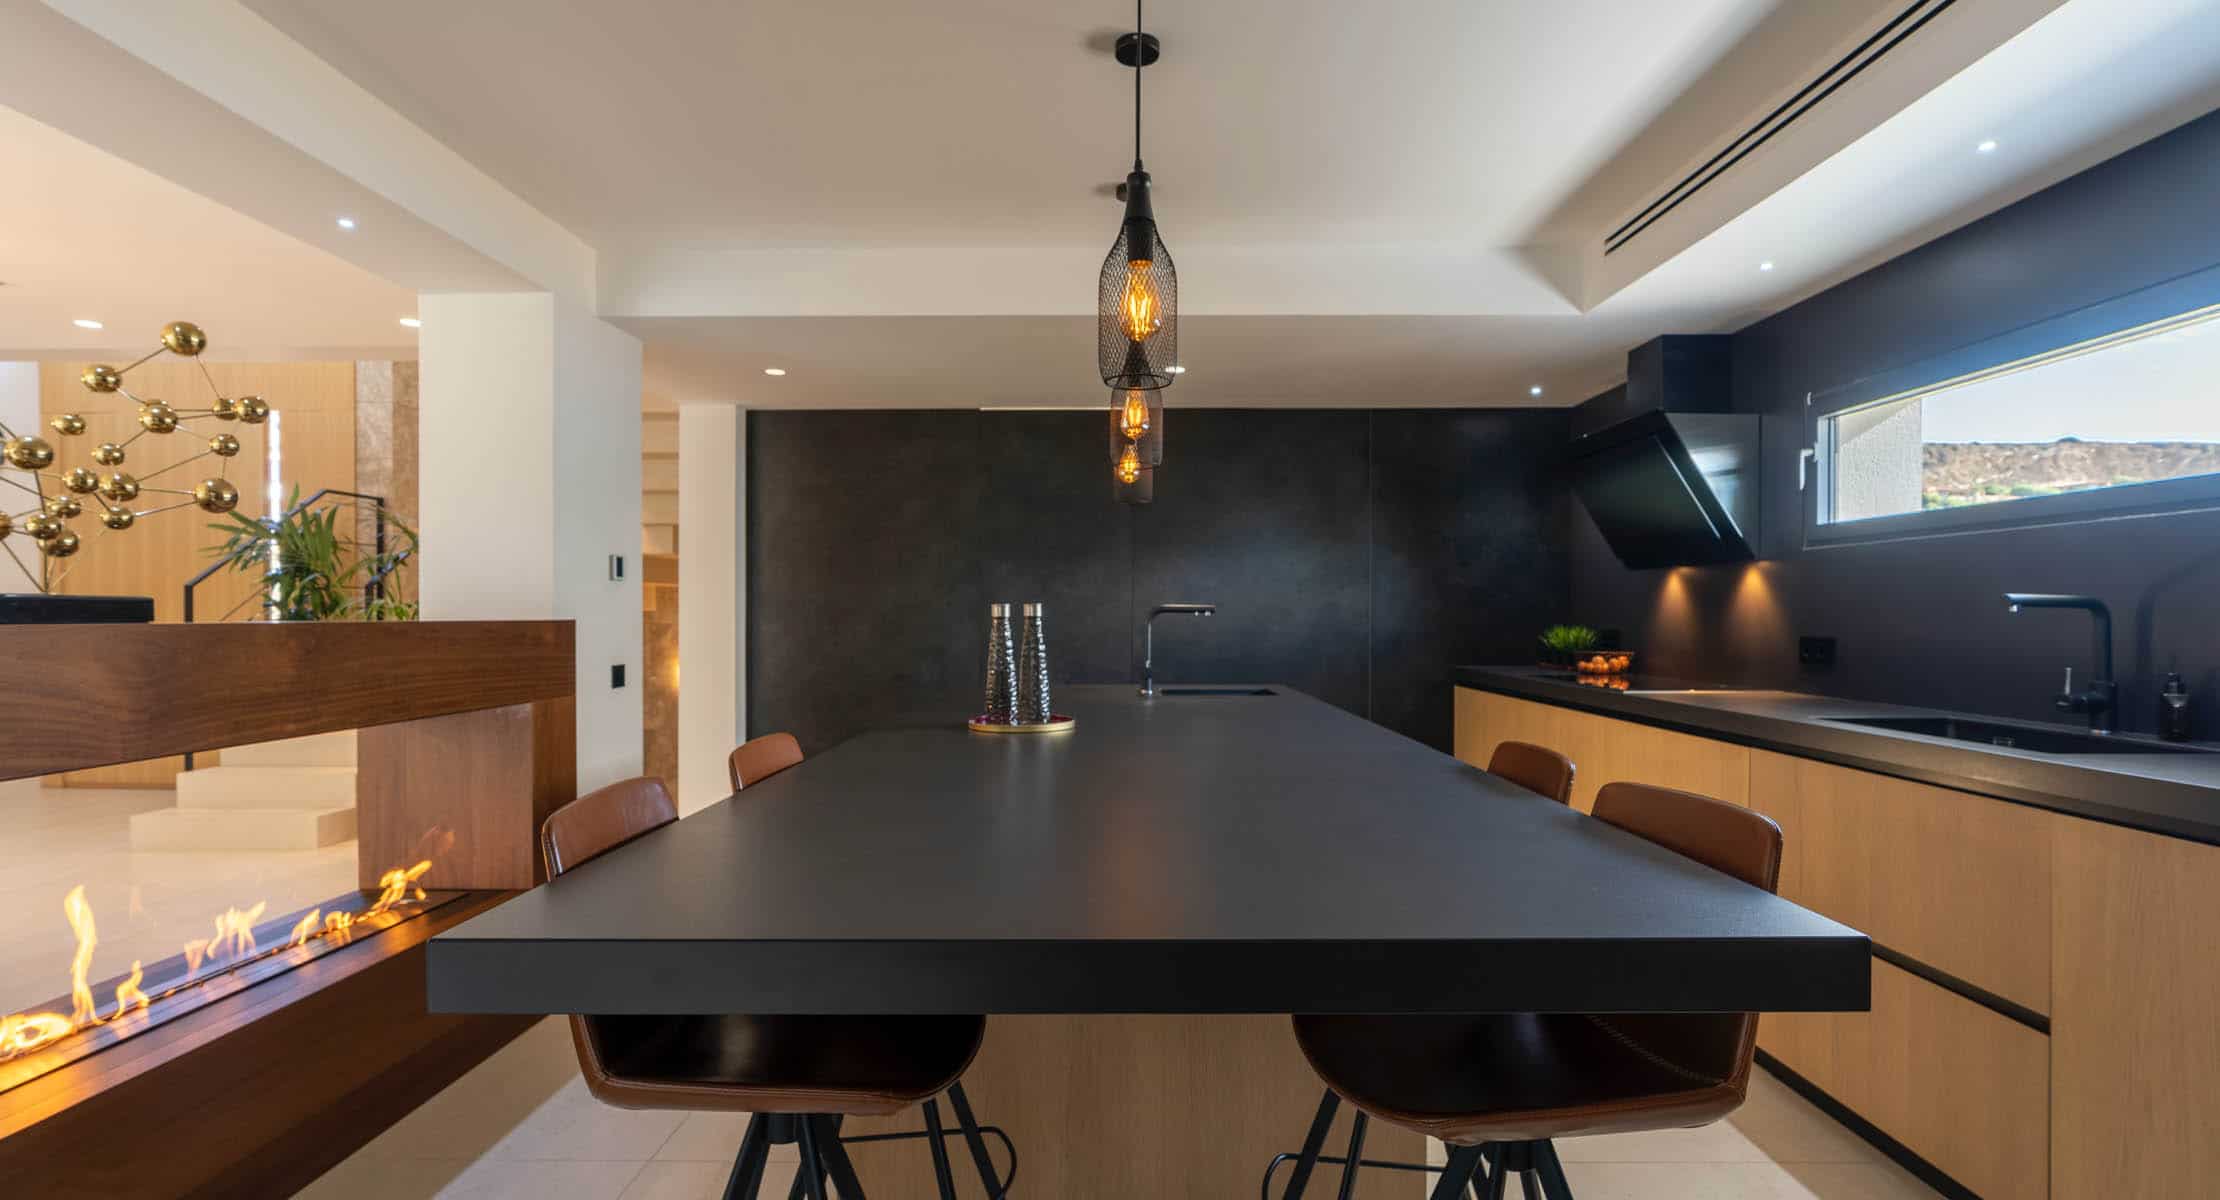 Image of cocinas 02 header in Kitchen table and wall cladding in the same material - Cosentino